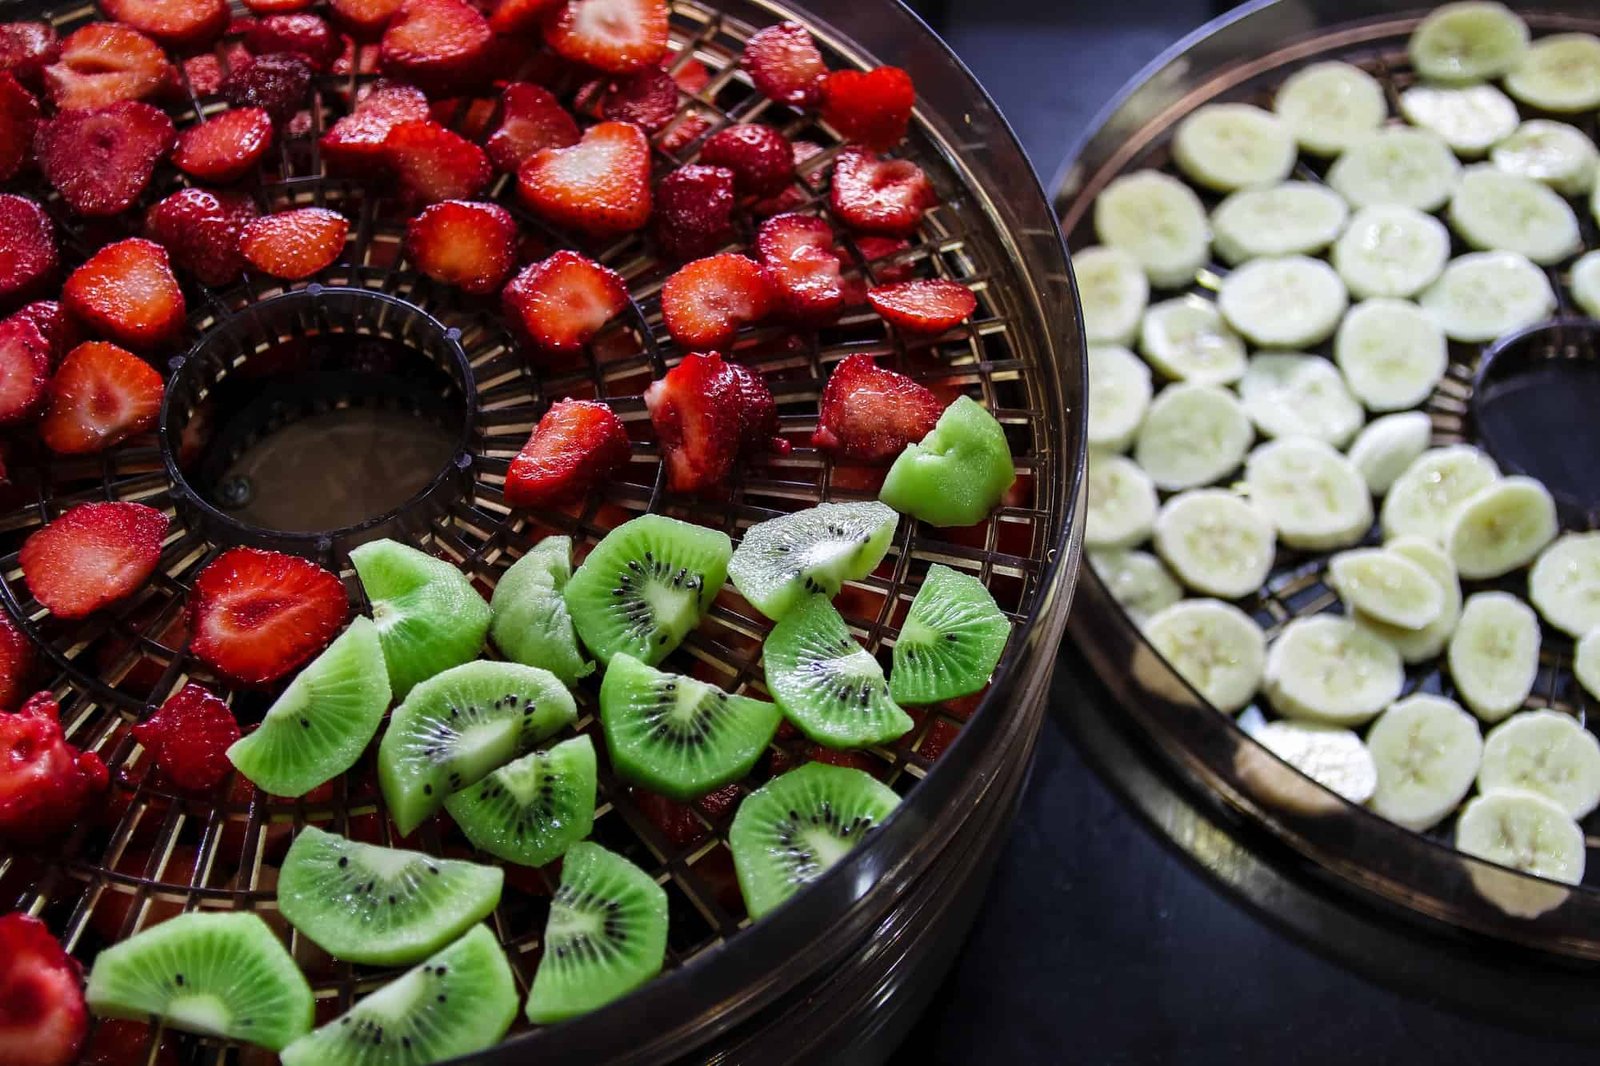 sliced strawberries and kiwis on a dehydrator tray next to it is sliced banana on dehydrator tray on black background